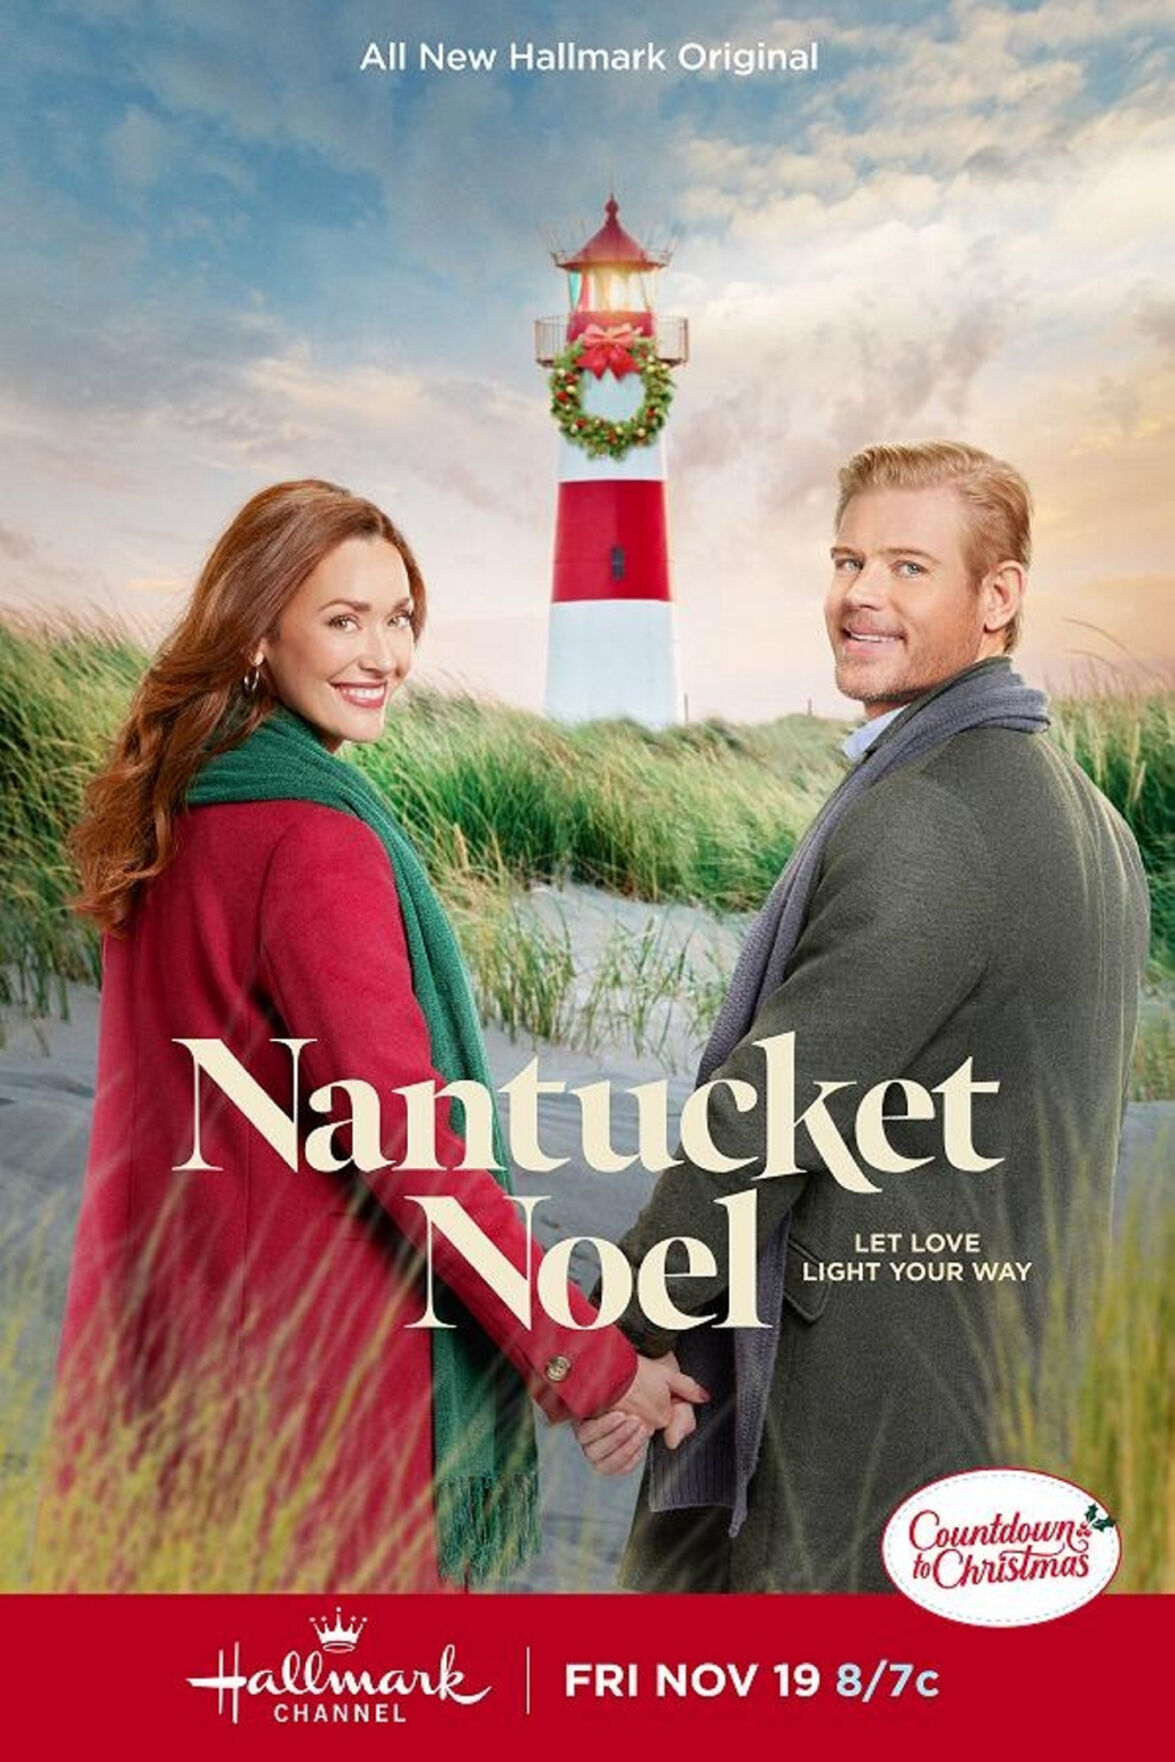 Your 2021 Guide To Hallmark Christmas Movies Arts And Entertainment Nny360 Com